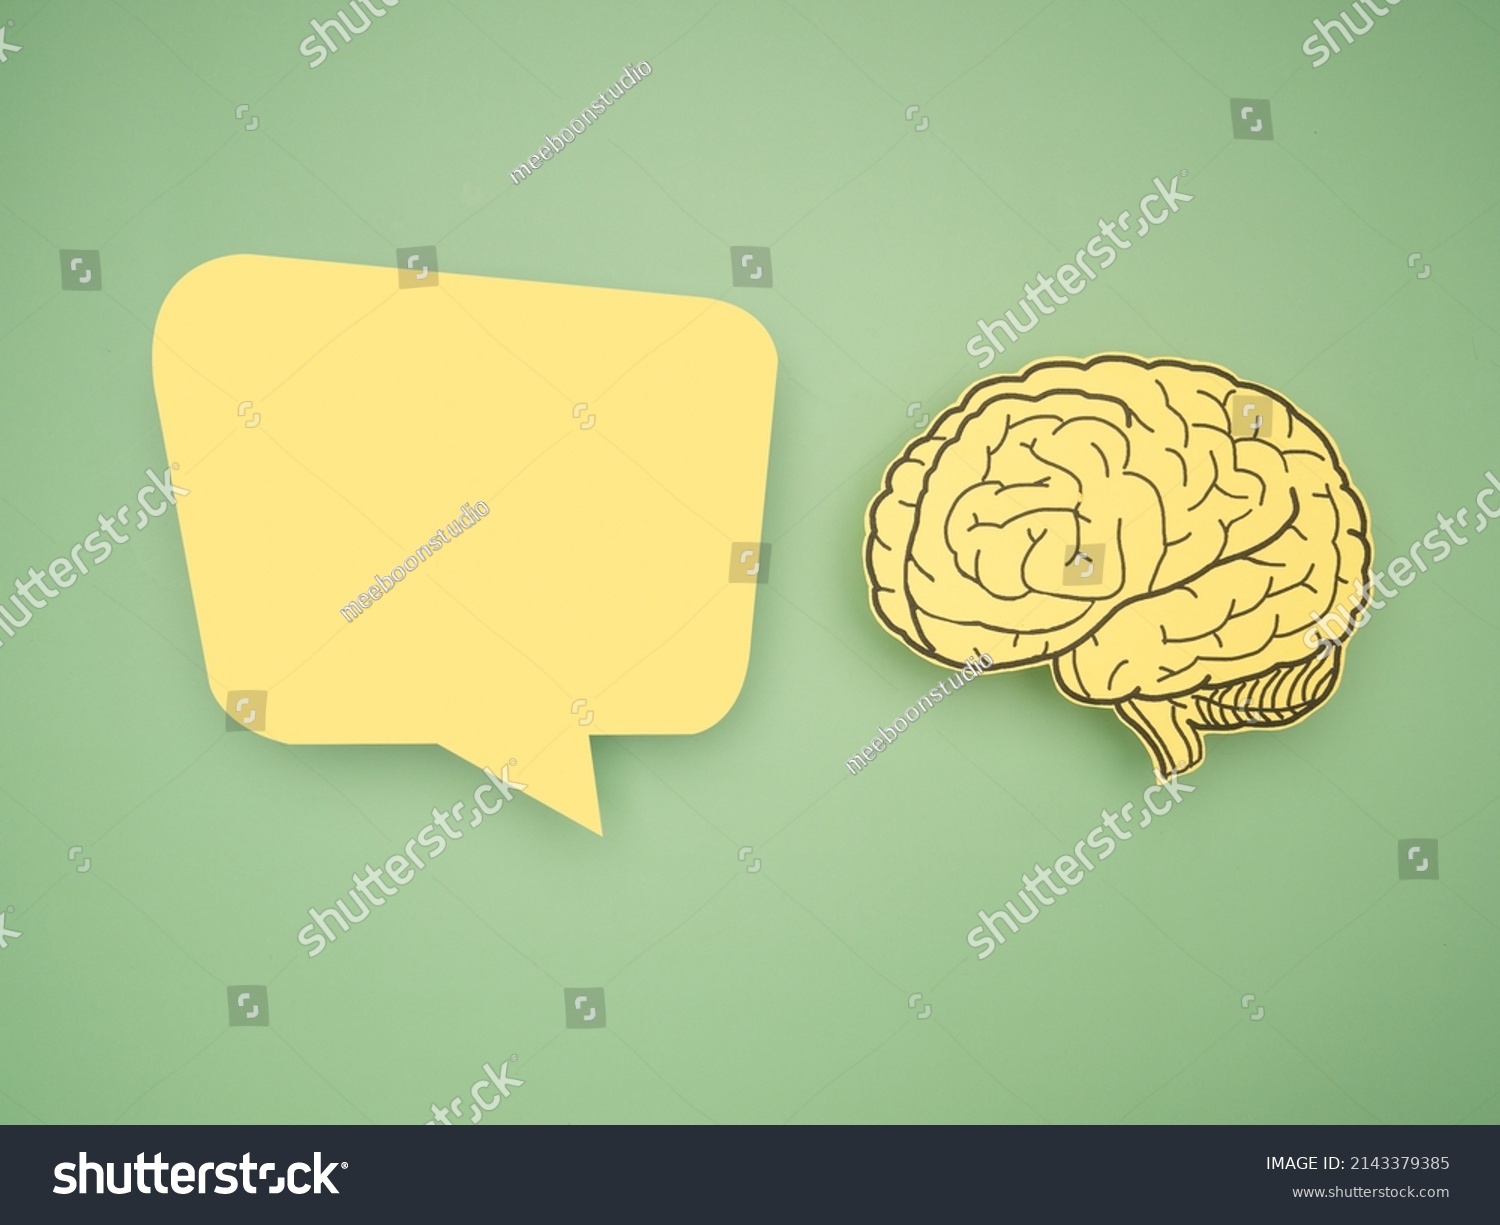 Yellow speech bubble and brain shape made from paper on a green background. Awareness of Alzheimer's, Parkinson's disease, dementia, stroke, seizure, or mental health. Neurology and Psychology care #2143379385